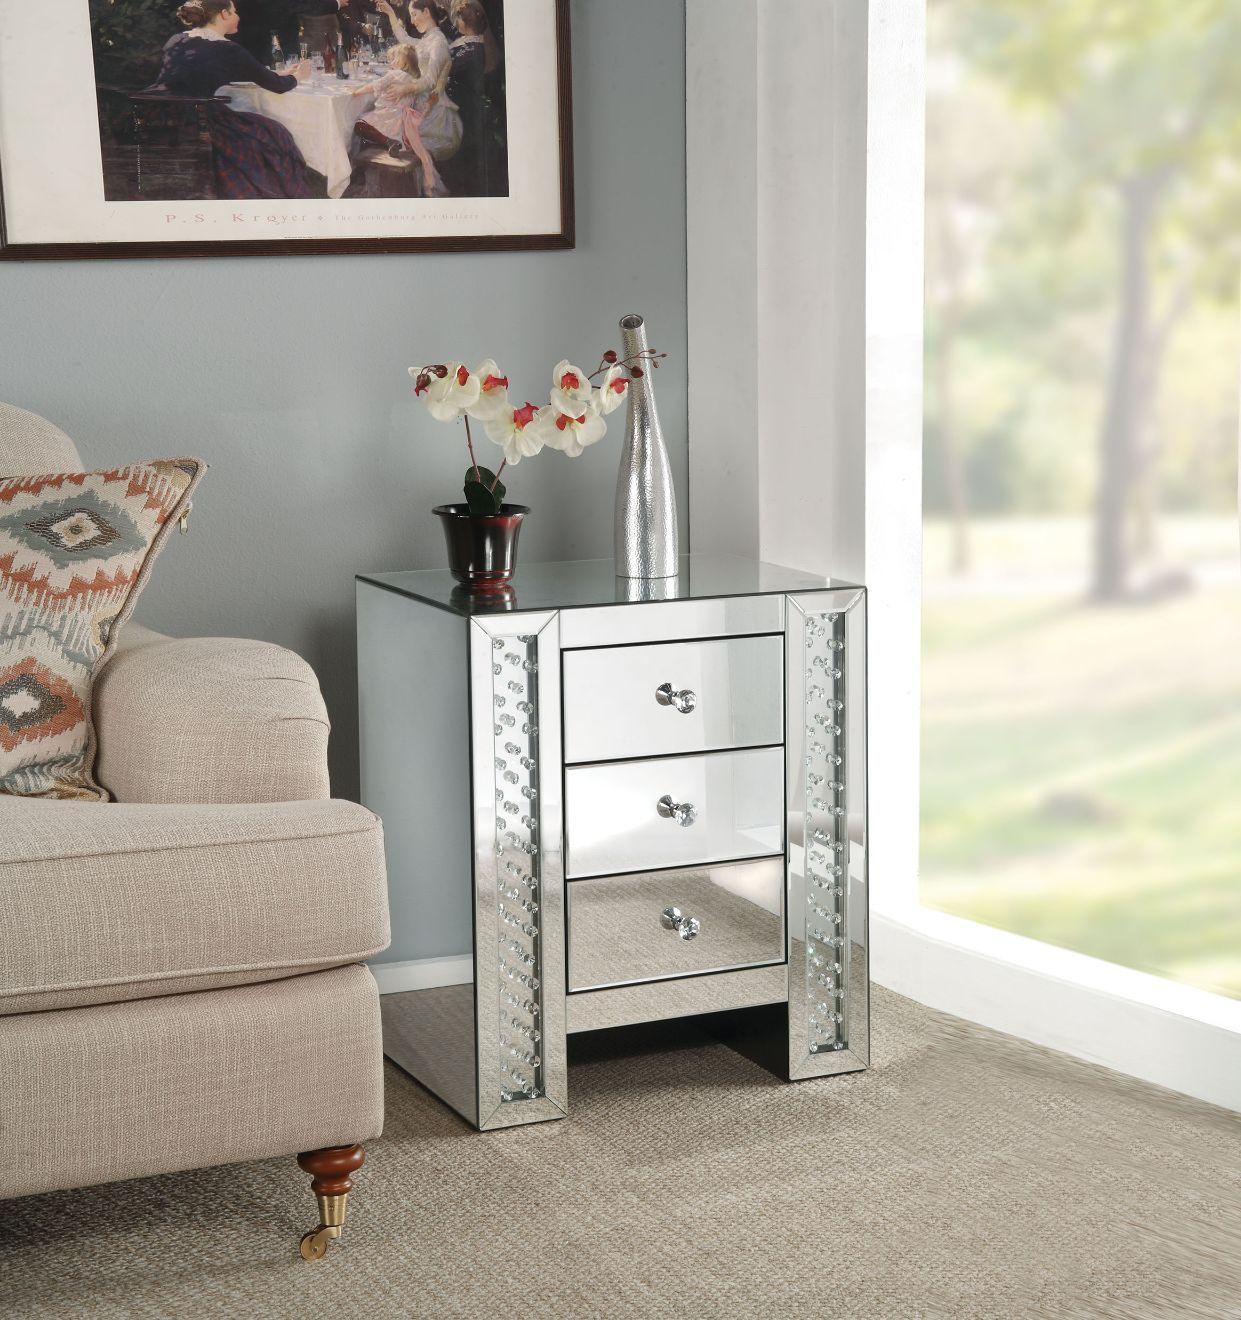 ACME - Nysa - Accent Table - Mirrored & Faux Crystals - Glass - 5th Avenue Furniture